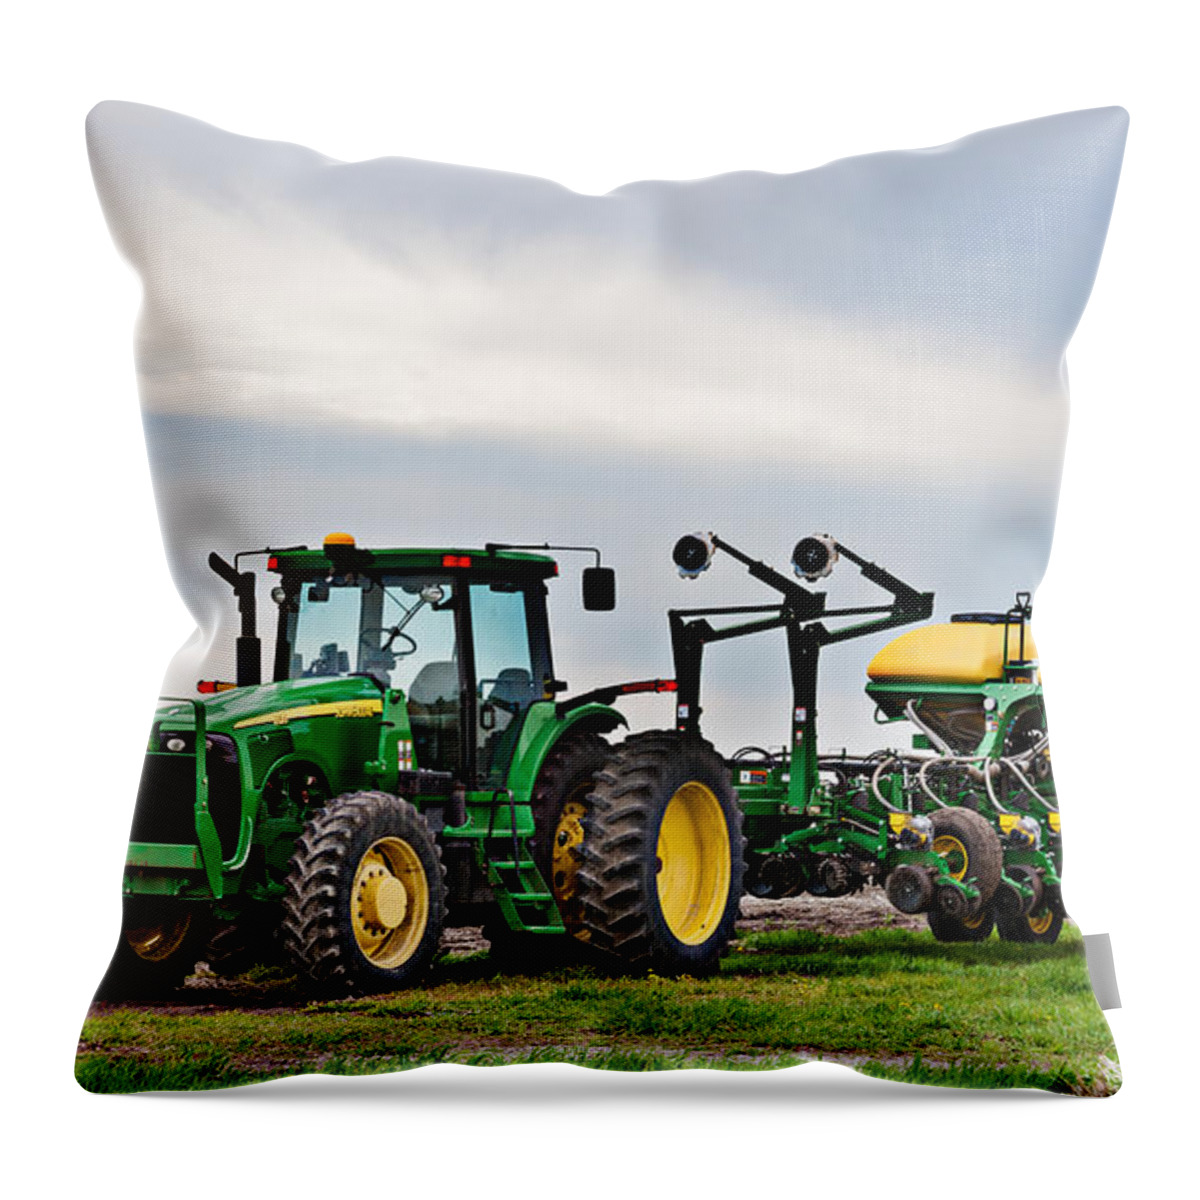 Tractor Throw Pillow featuring the photograph Everyday Big by Ed Peterson